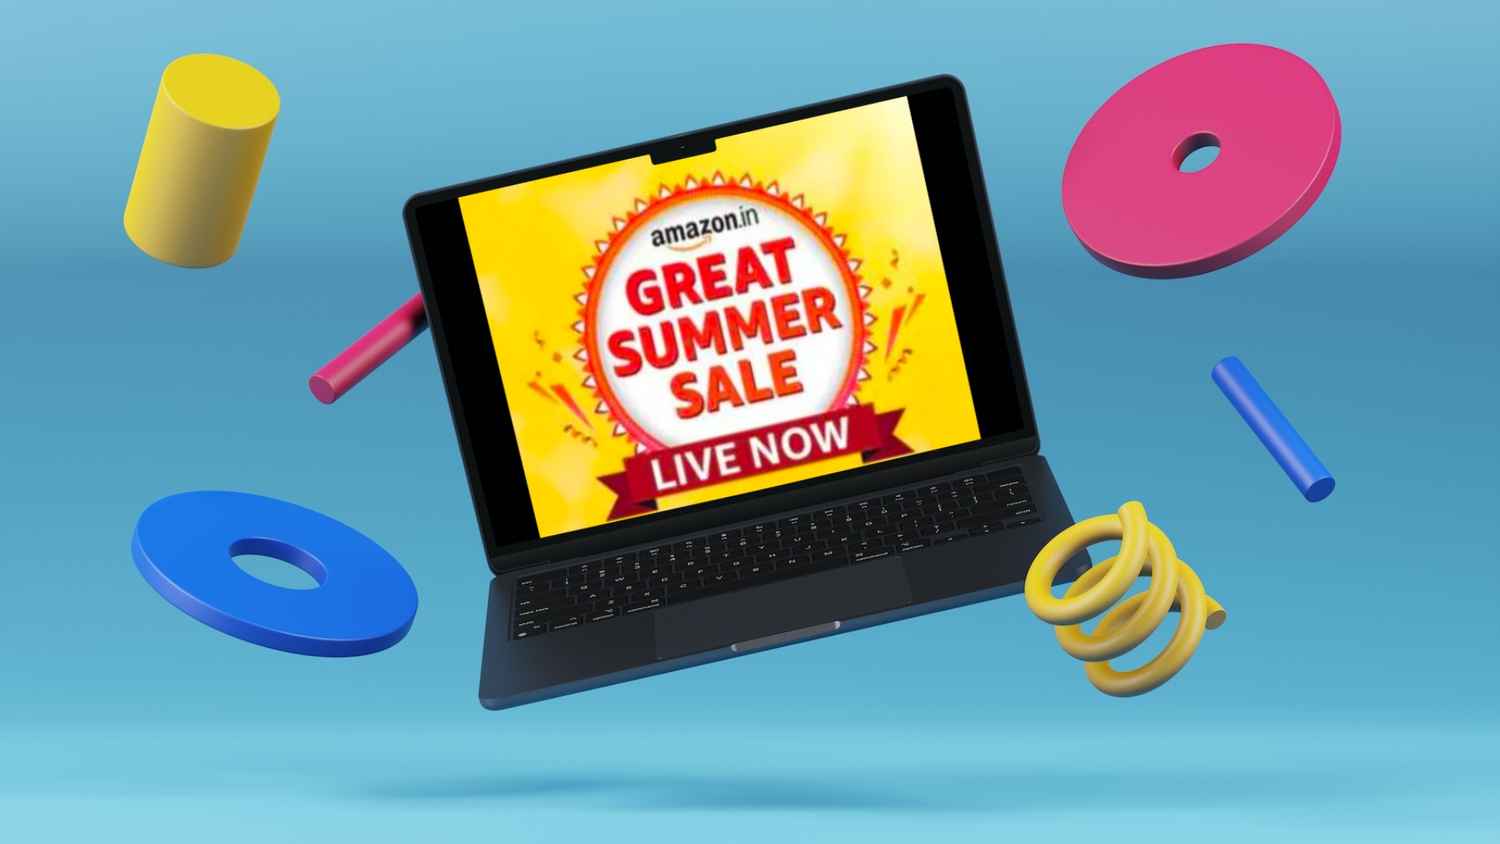 Amazon Great Summer Sale deals: 5 unique and useful products under ₹500 incl. unbelievable discounts